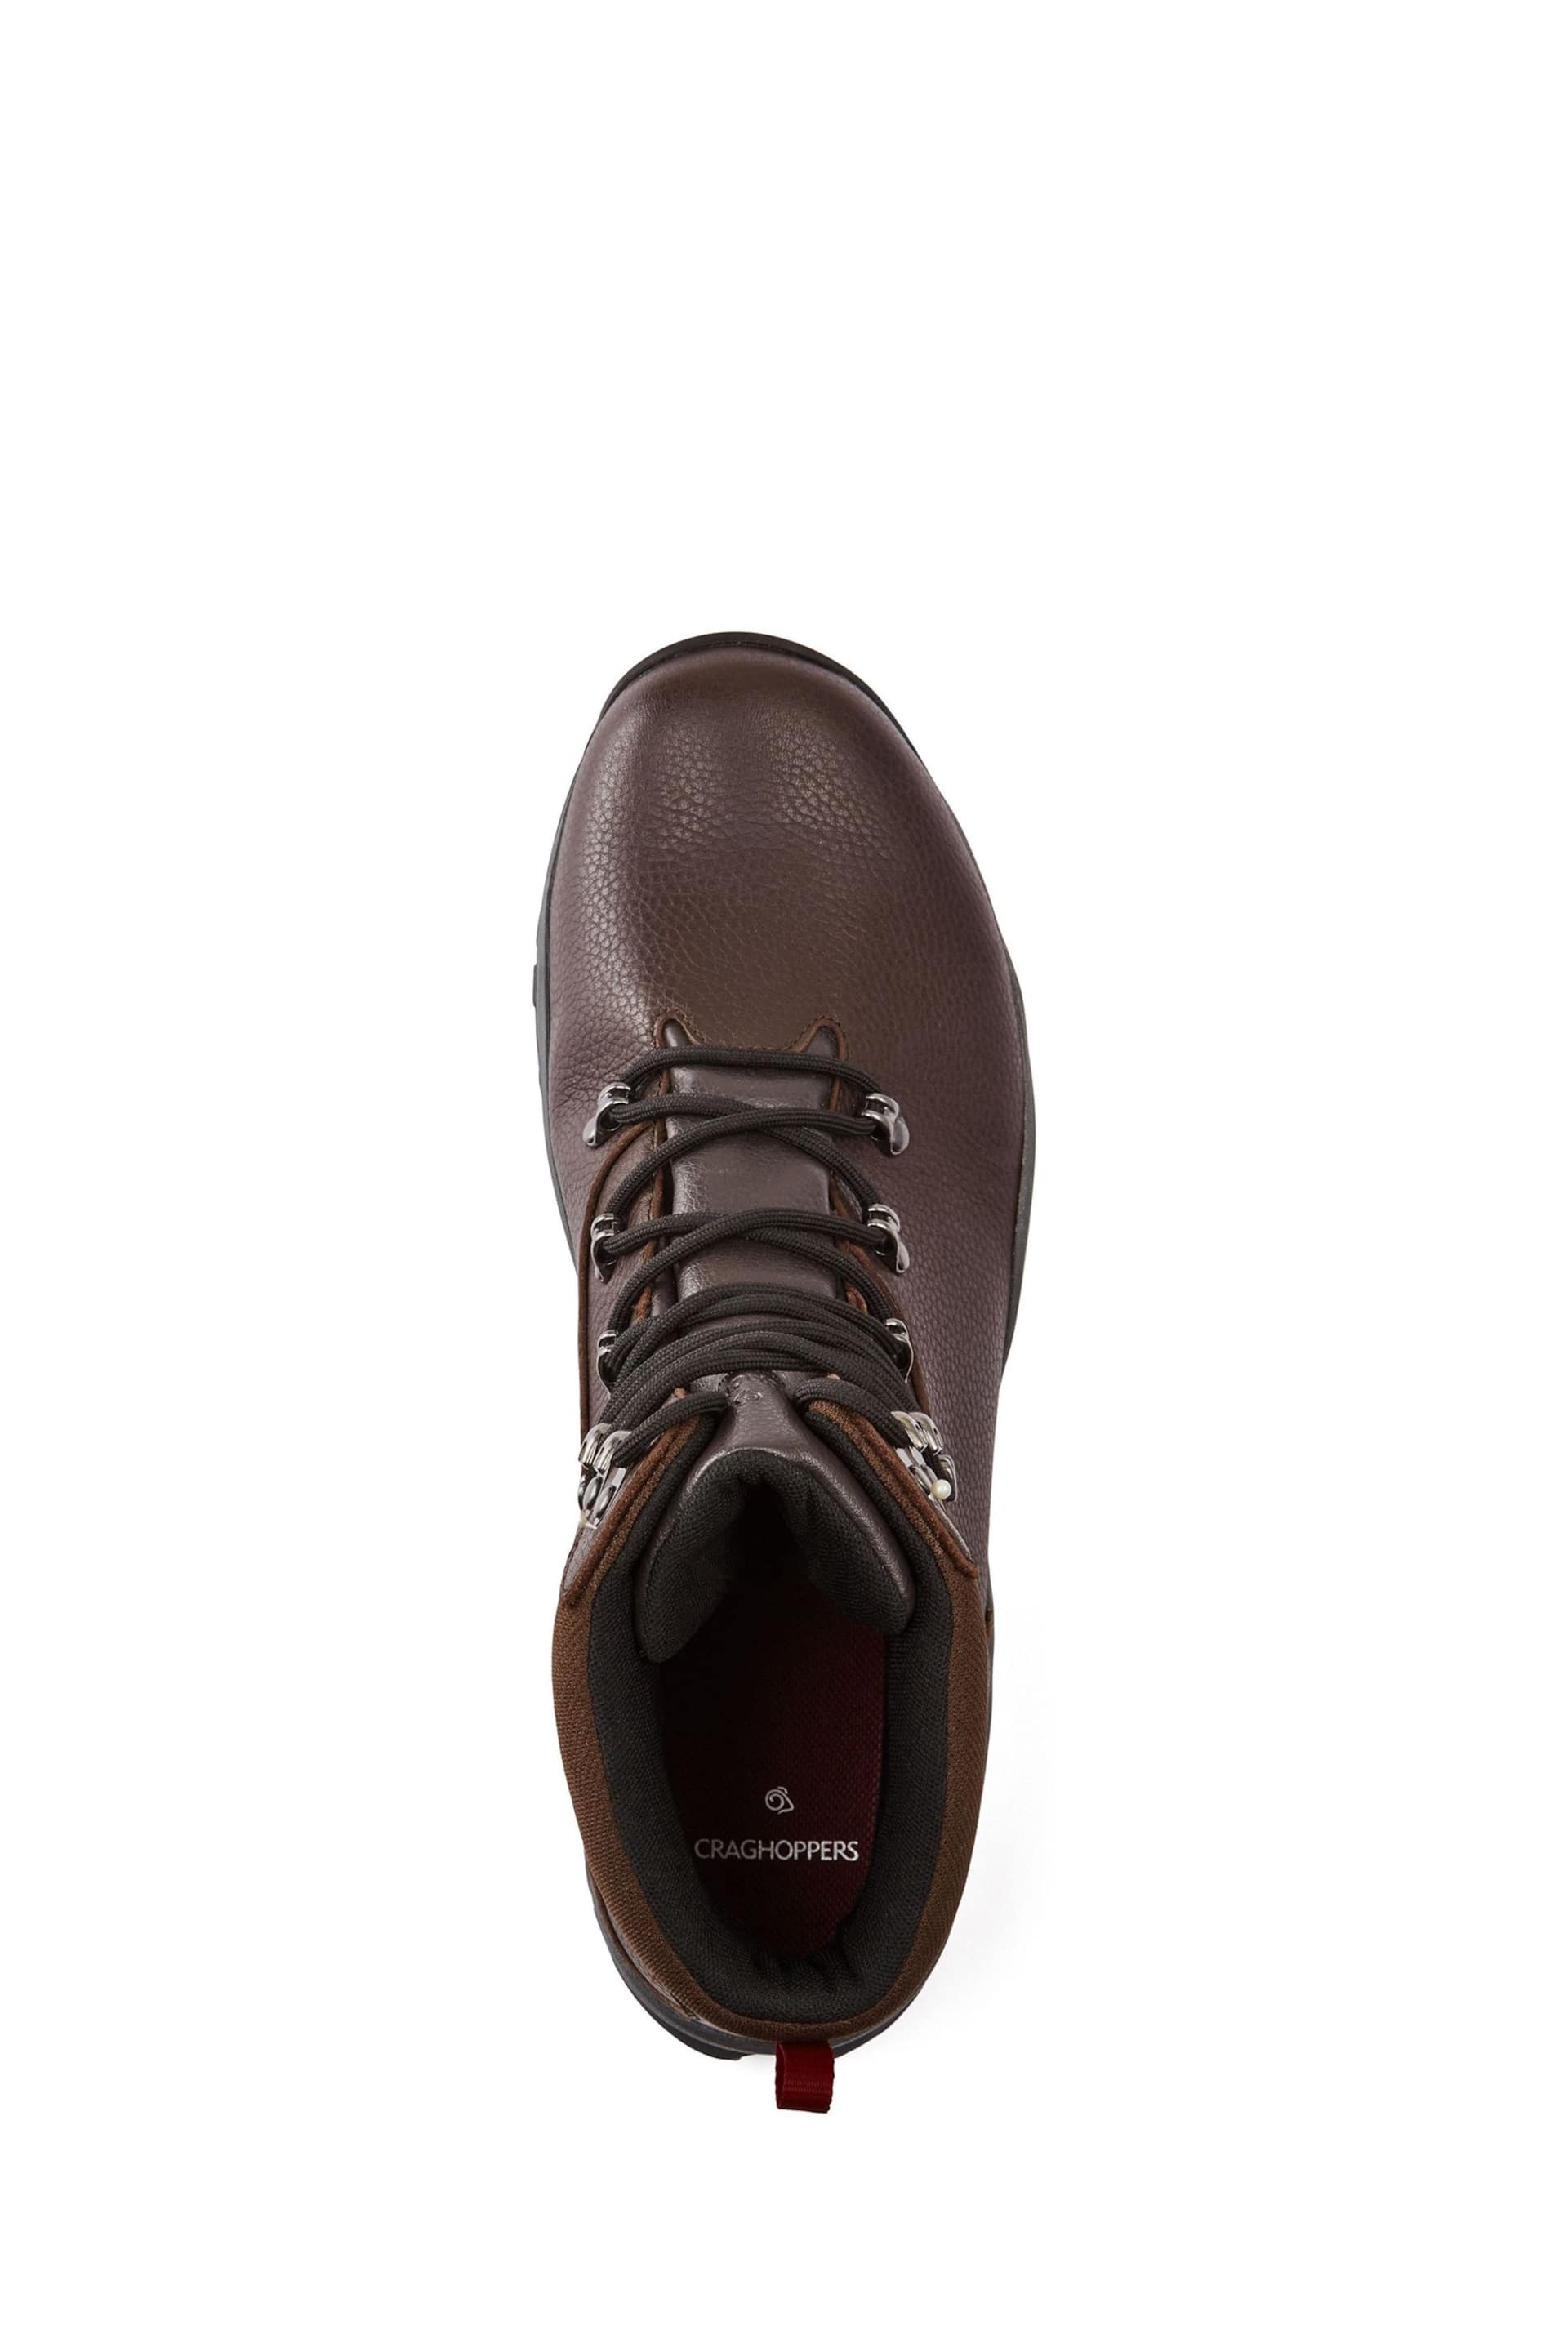 Craghoppers Lite NewHide Brown Shoes - Image 3 of 4